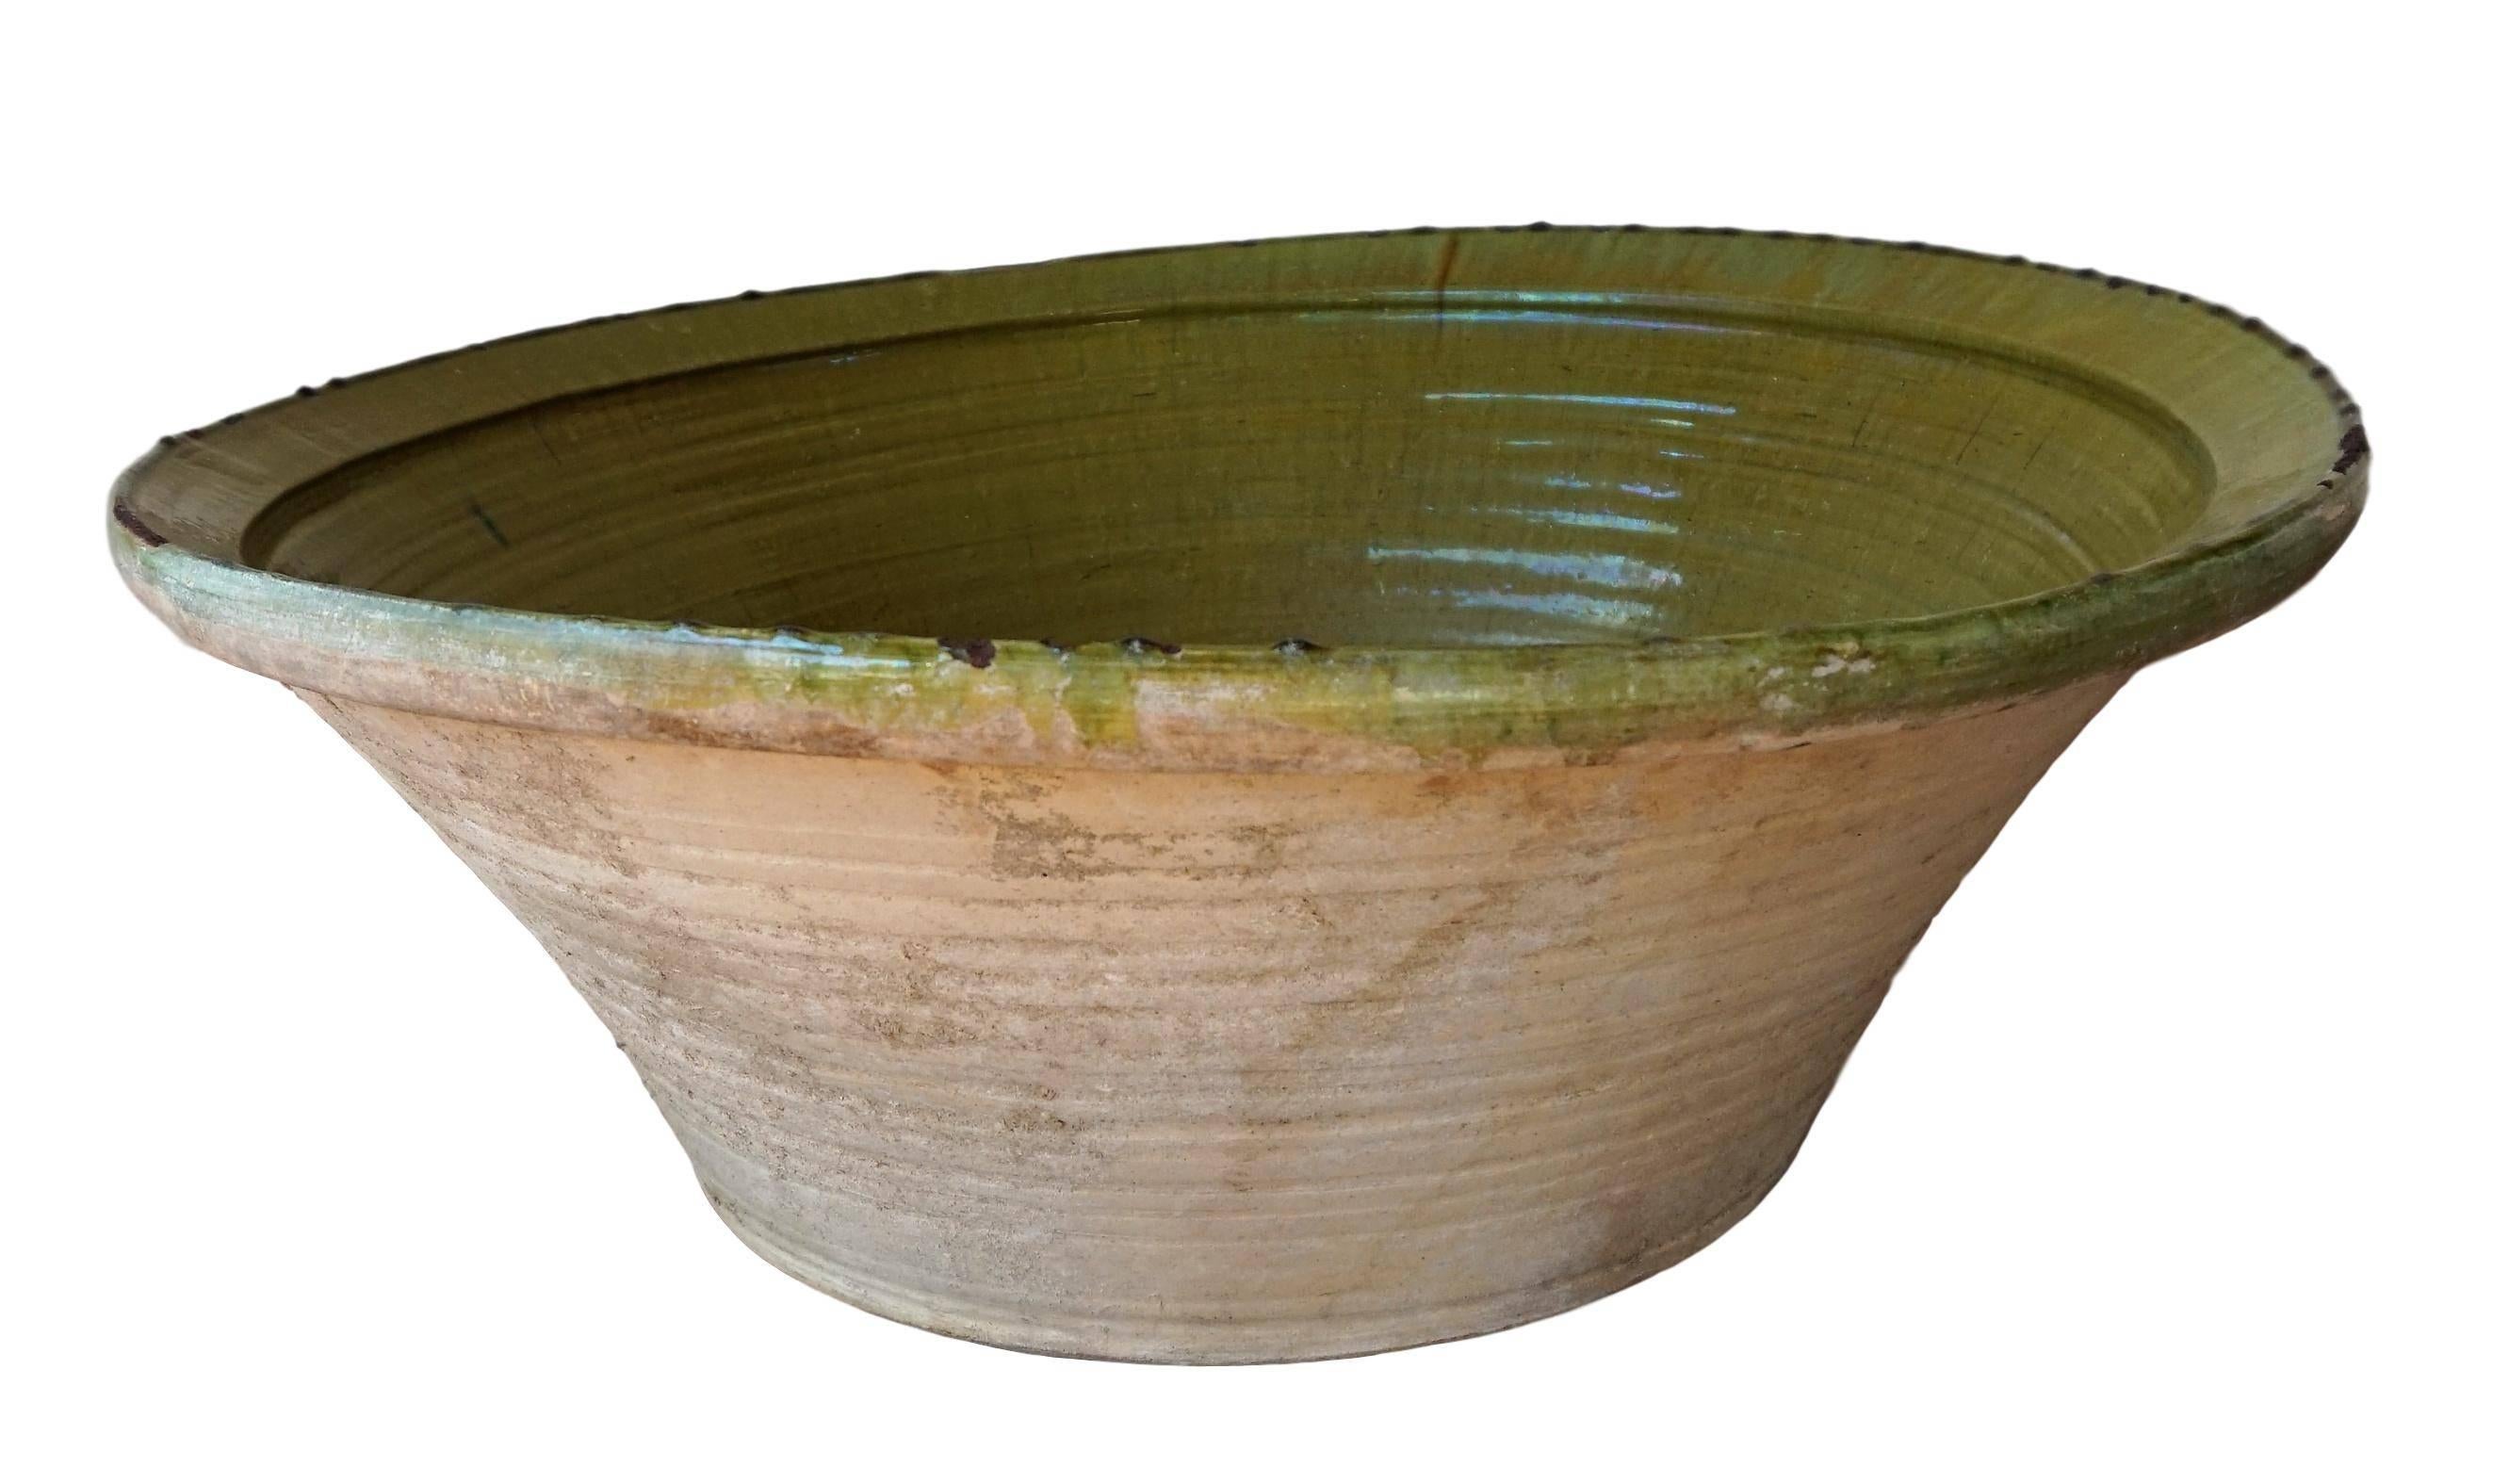 Large one-of-a-kind gorgeous hand thrown and hand glazed green and cream colored stoneware pottery bowl vessel. Thick and glazing like.

This would make an excellent indoor or outdoor water feature. Also appropriate for indoor or outdoor use for